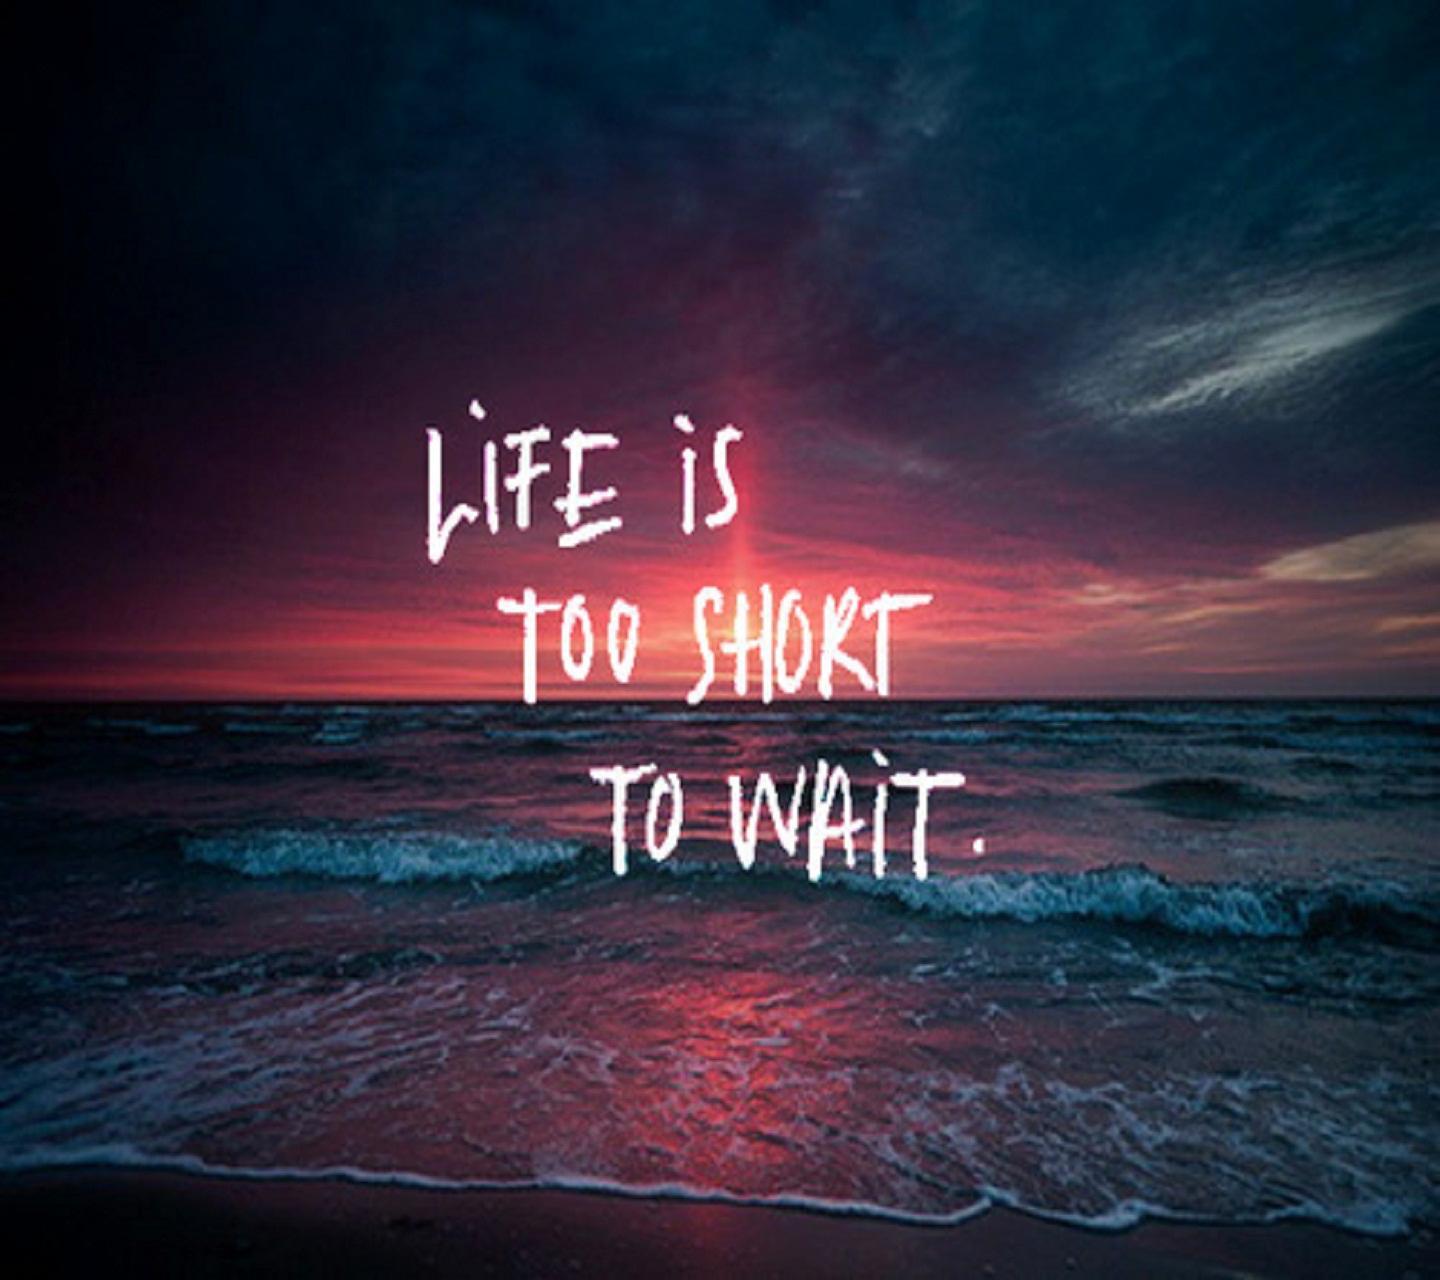 Life Is Short Wallpaper Free Life Is Short Background